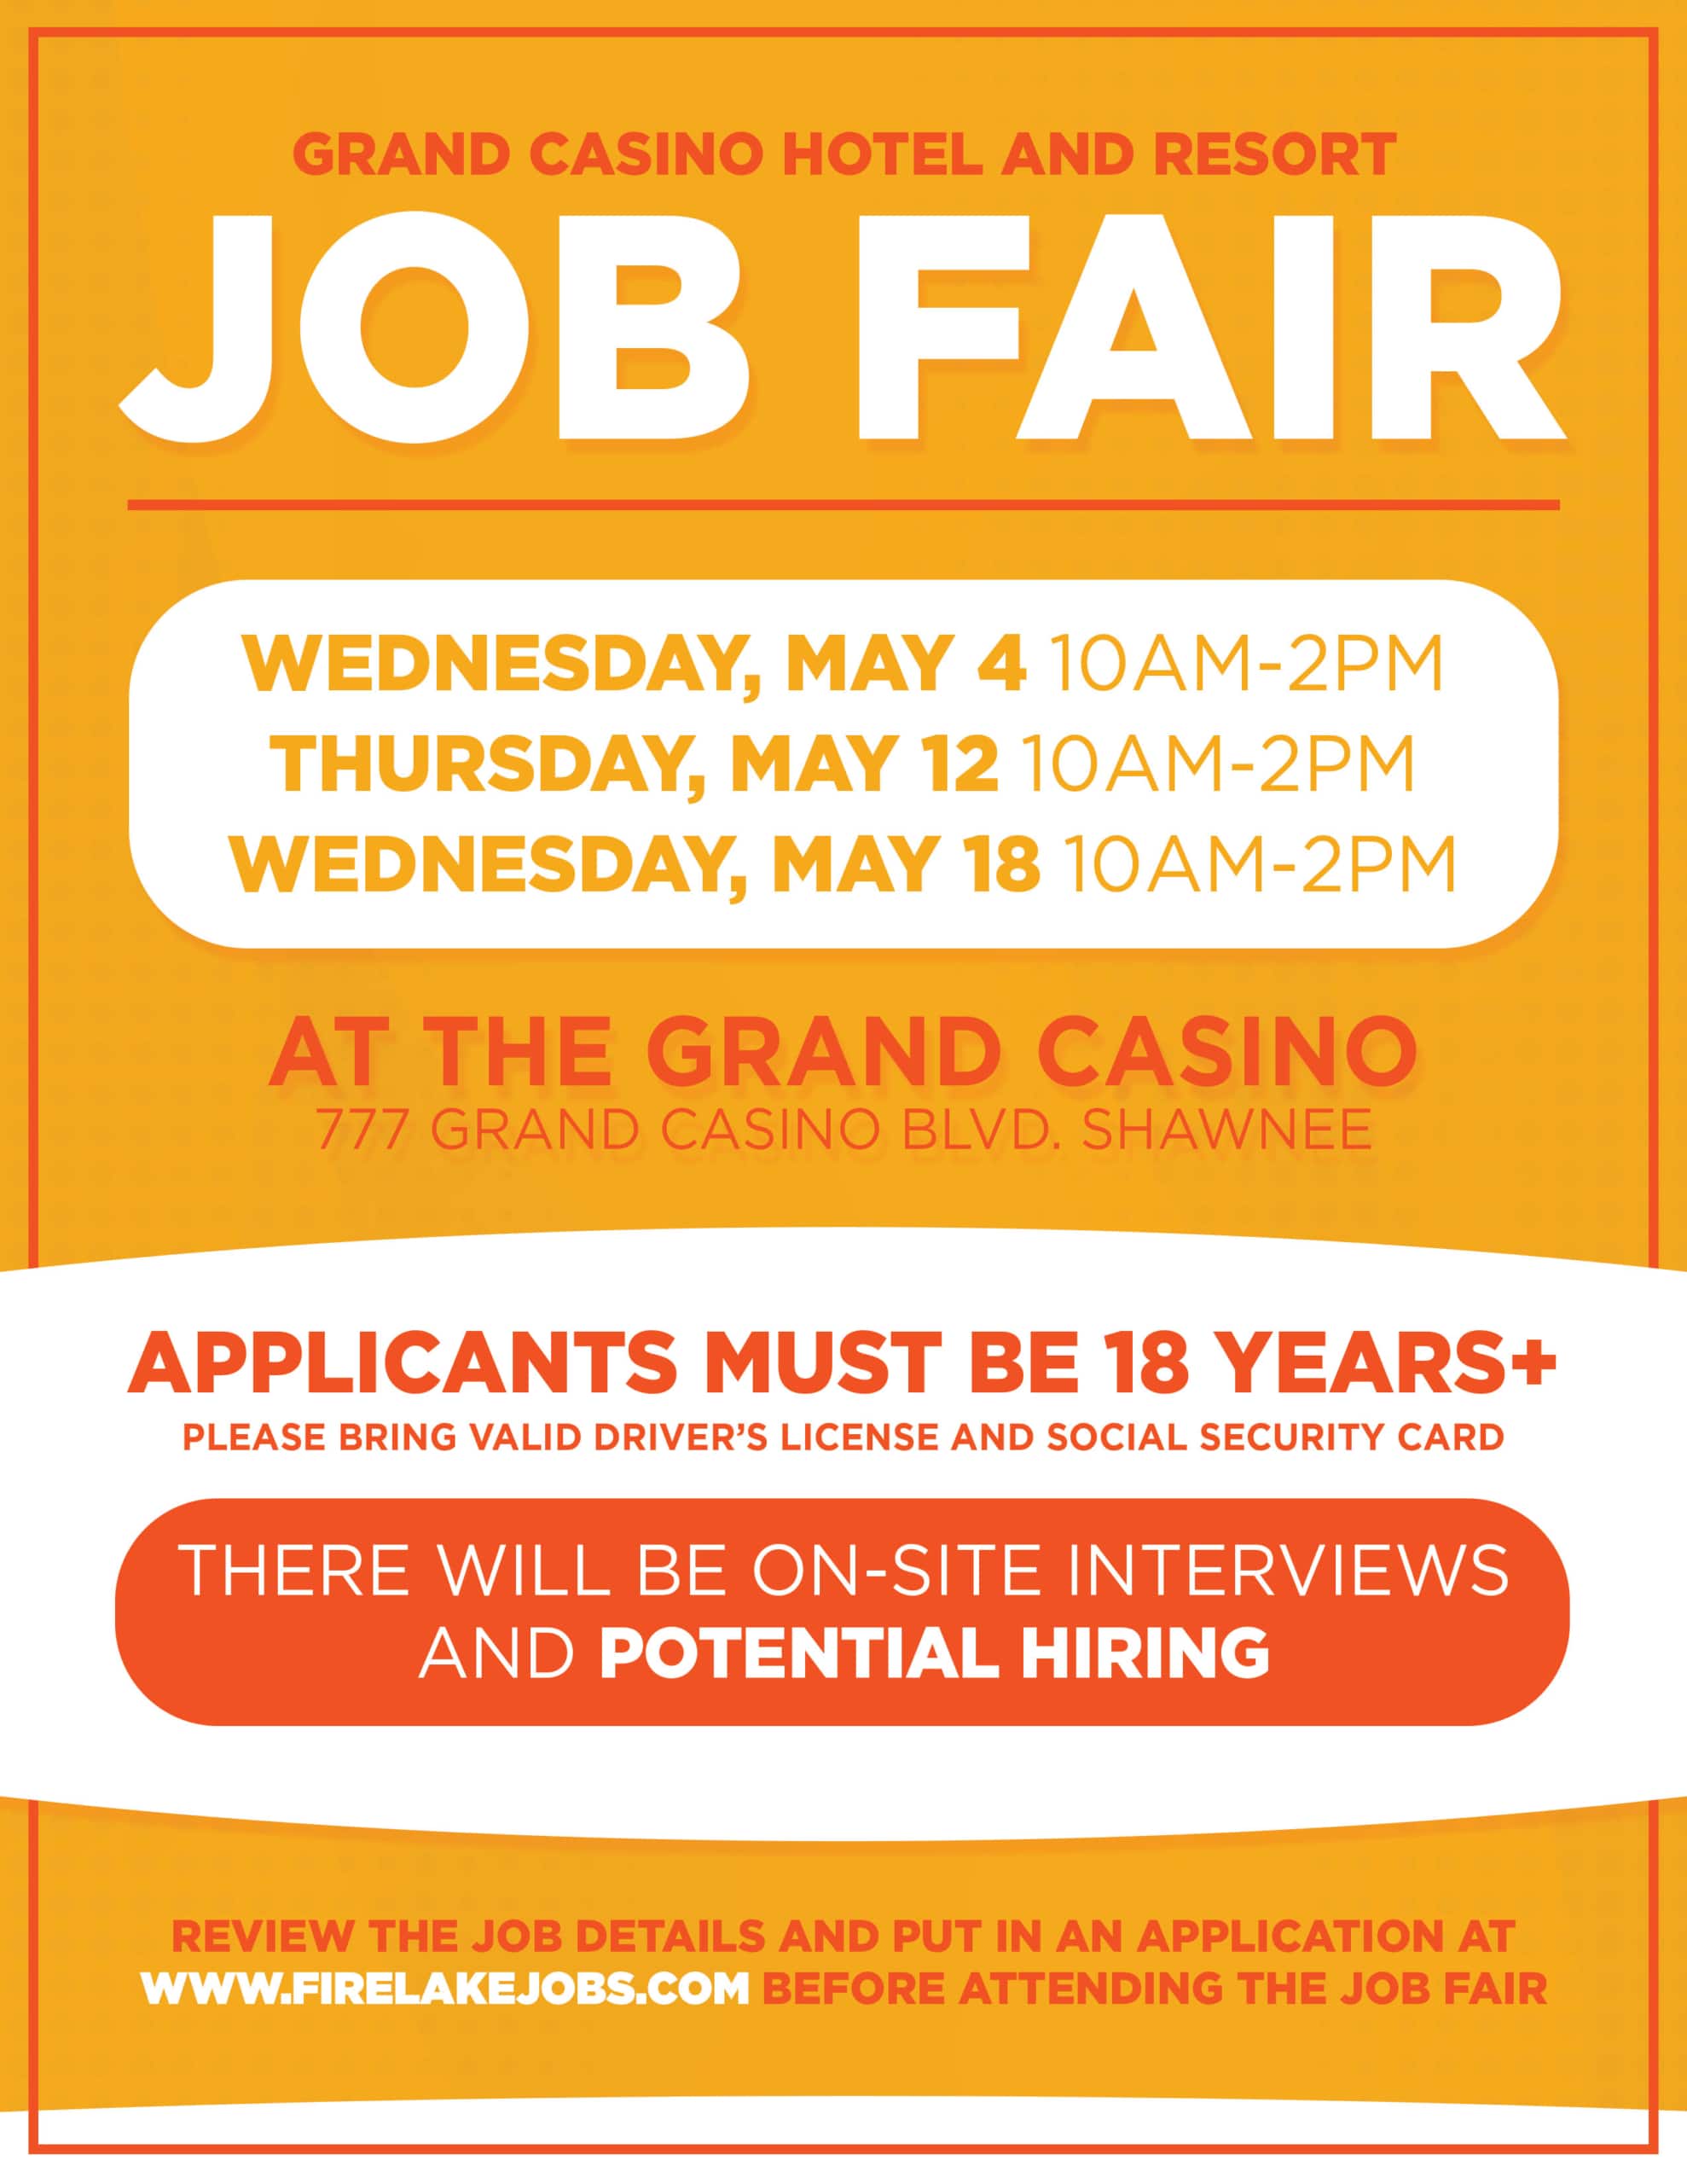 An orange and white flyer advertising a series of upcoming job fair events at the Grand Casino Hotel and Resort on May 4, 12, and 18, 2022, from 10am-2pm. There will be on-site interviews and potential hiring. Applicants must be 18 years of age or older. Please bring valid driver's license and social security card. Review the job details and put in an application at www.firelakejobs.com before attending the job fair.